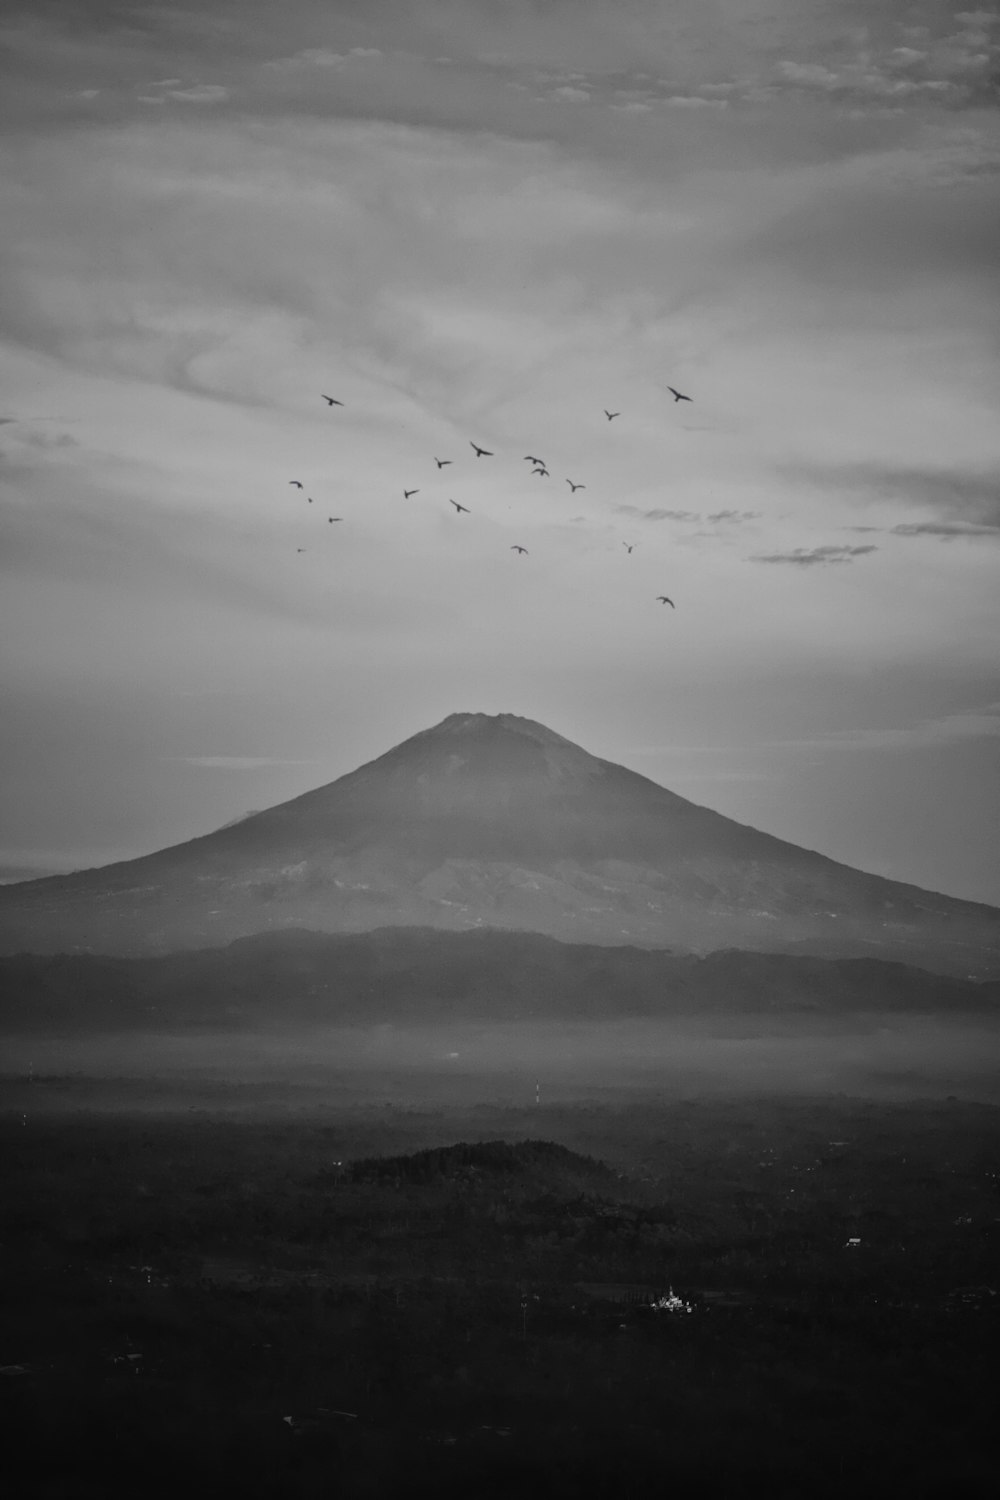 flight of birds and mountain in distant